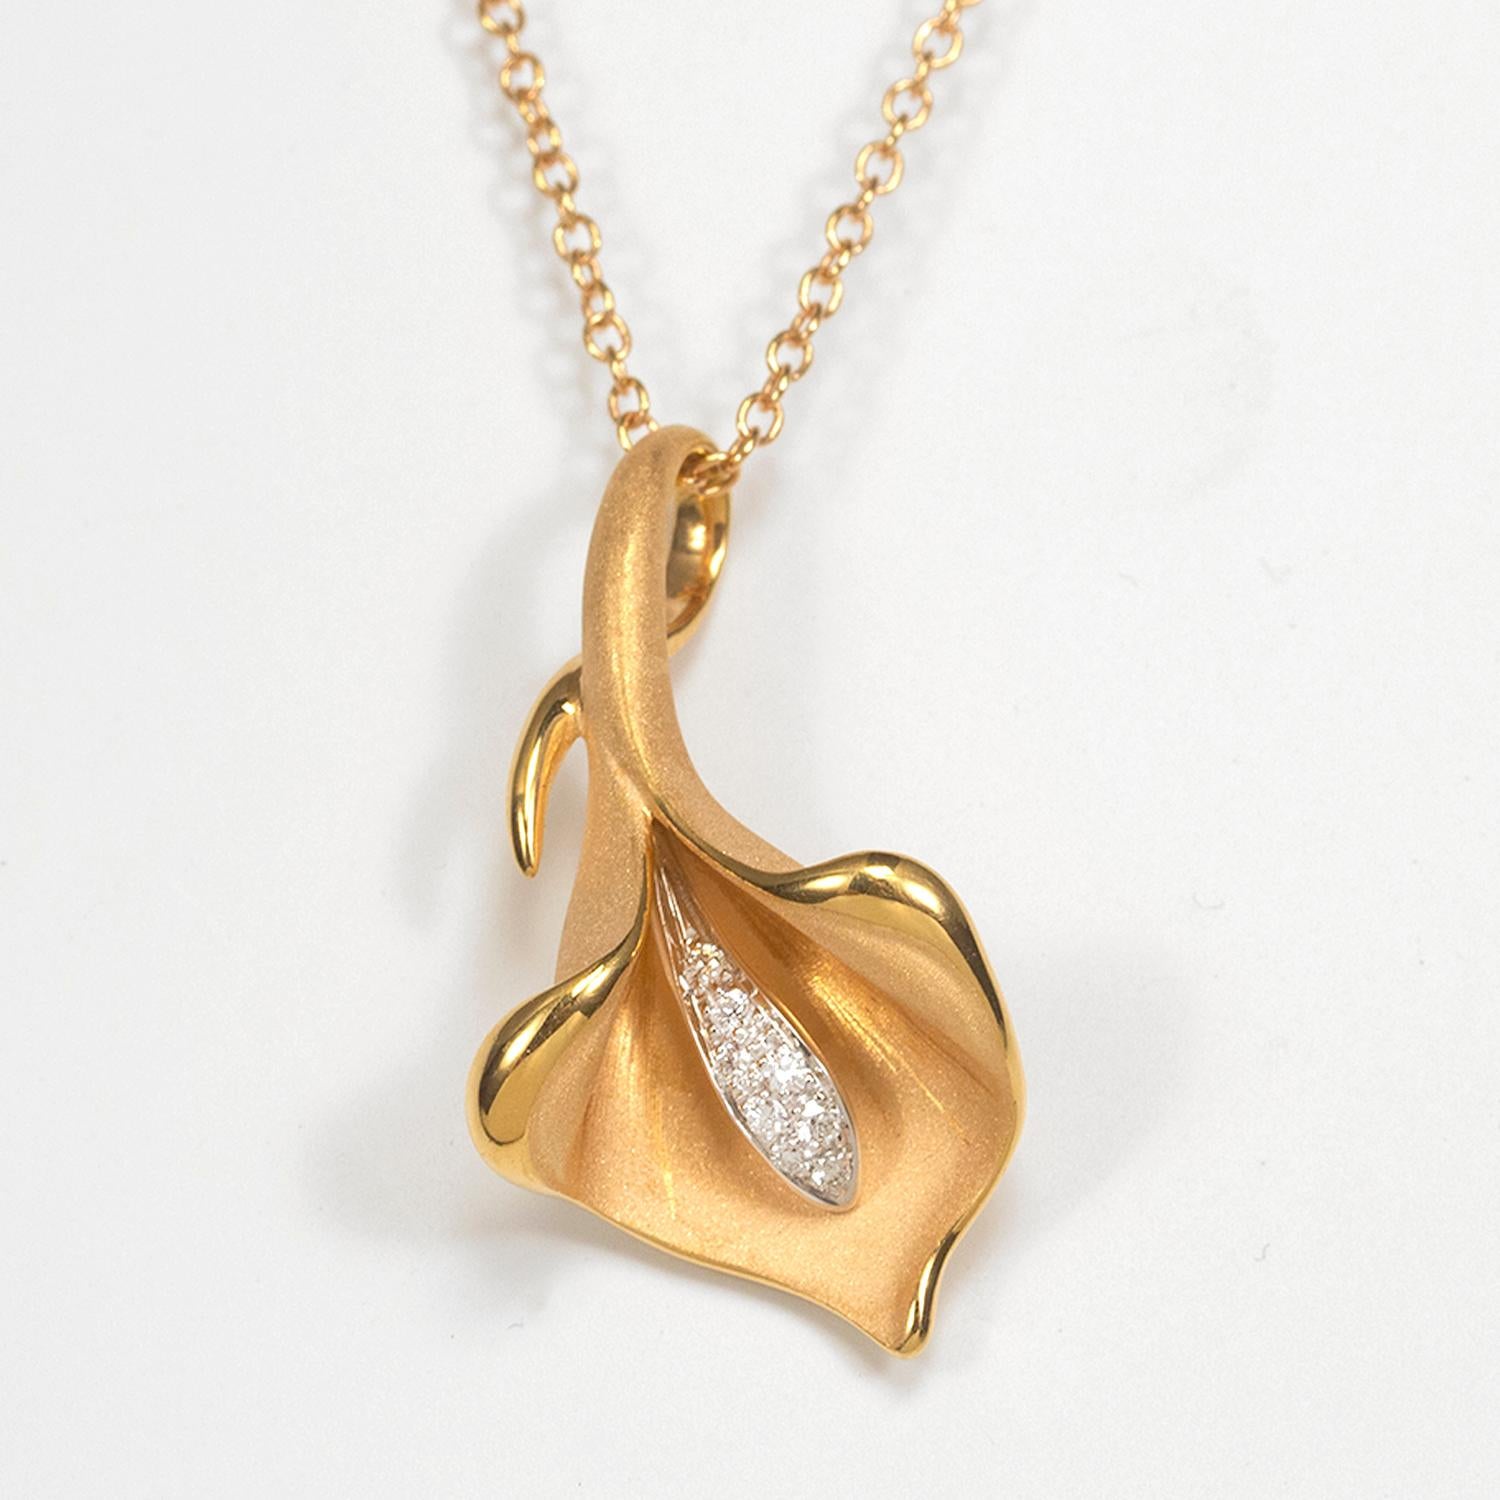 From Annamaria Cammilli's Calla collection, Calla flower shaped pendant necklace handcrafted in 18 karat Apricot Orange gold. Hand crafted of polished and satin textured gold, with diamonds. Diamond total weight is 0.09 carat. Pendant dimensions are